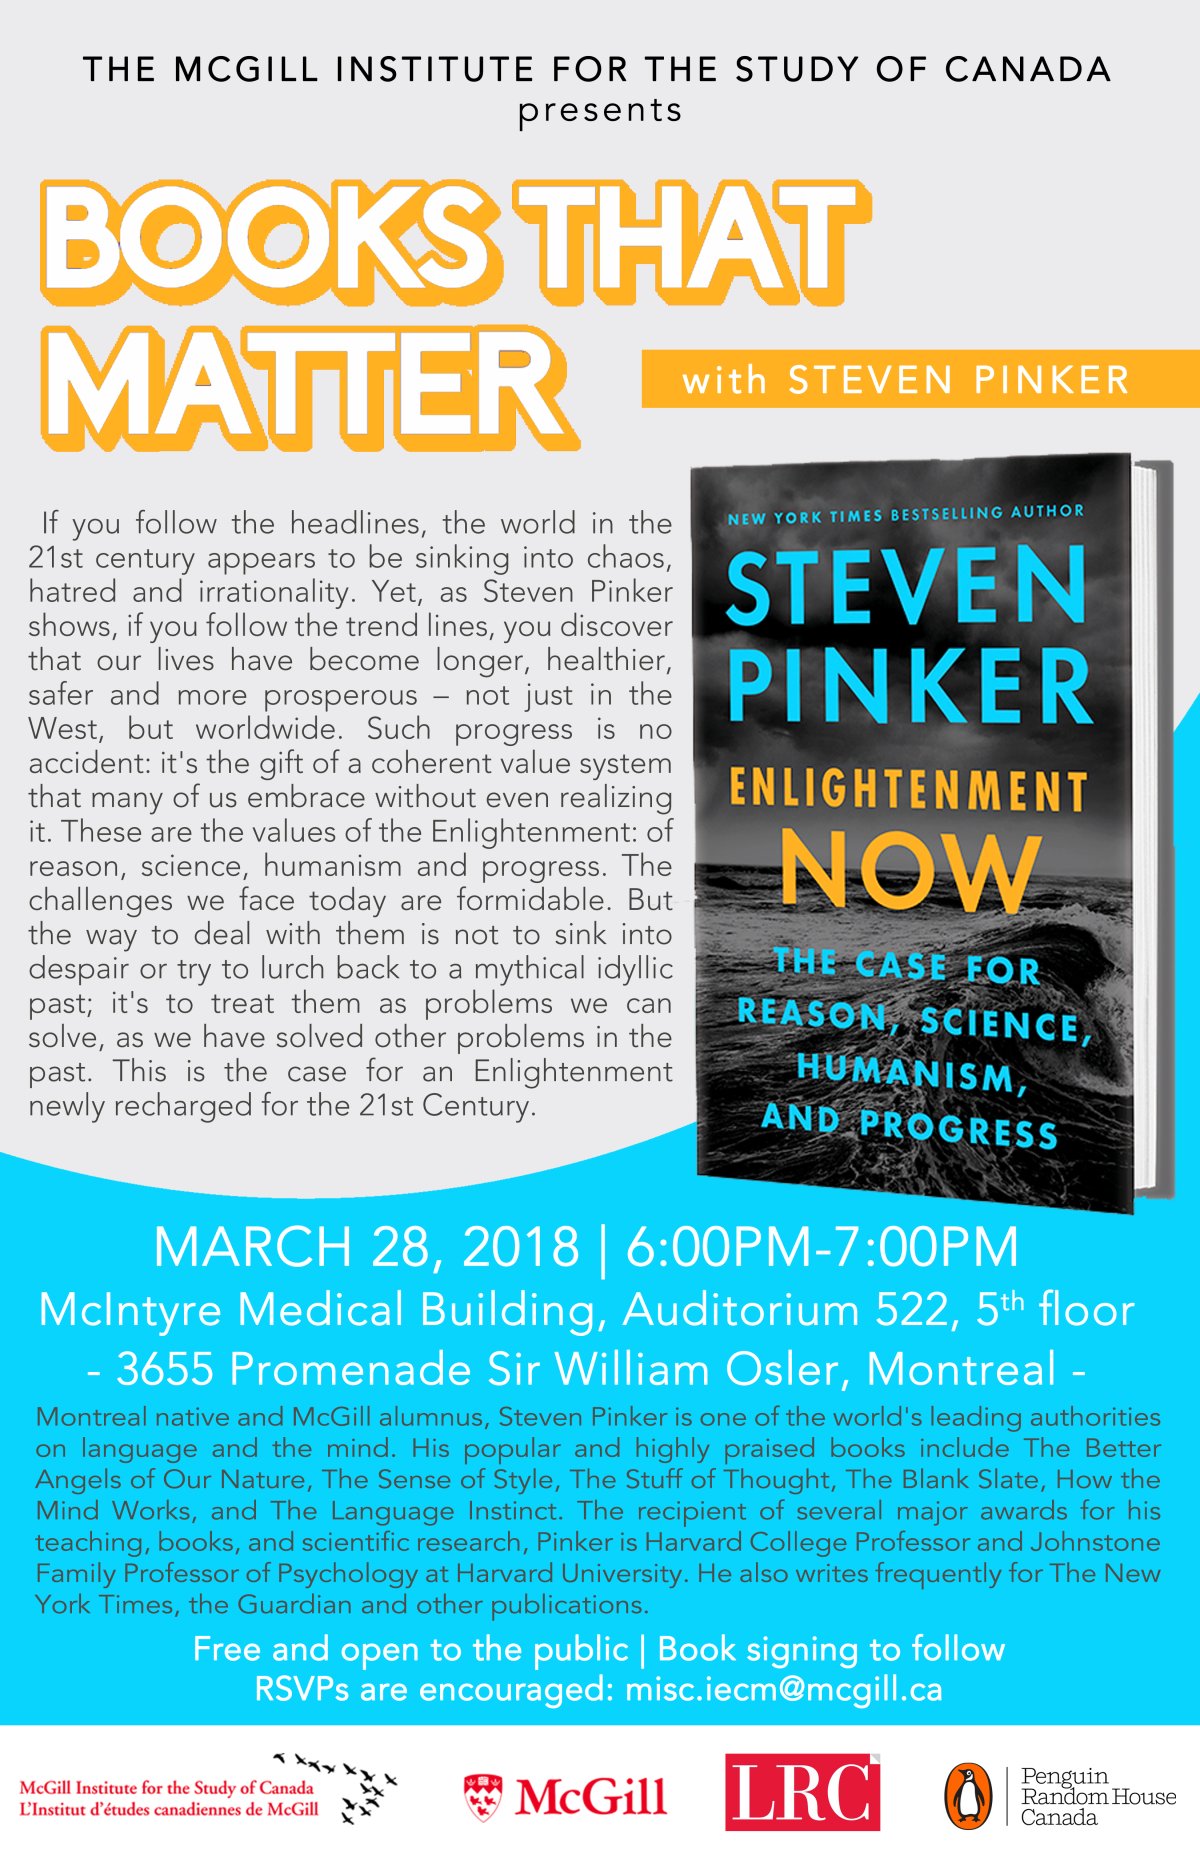 Enlightenment Now with Steven Pinker - image